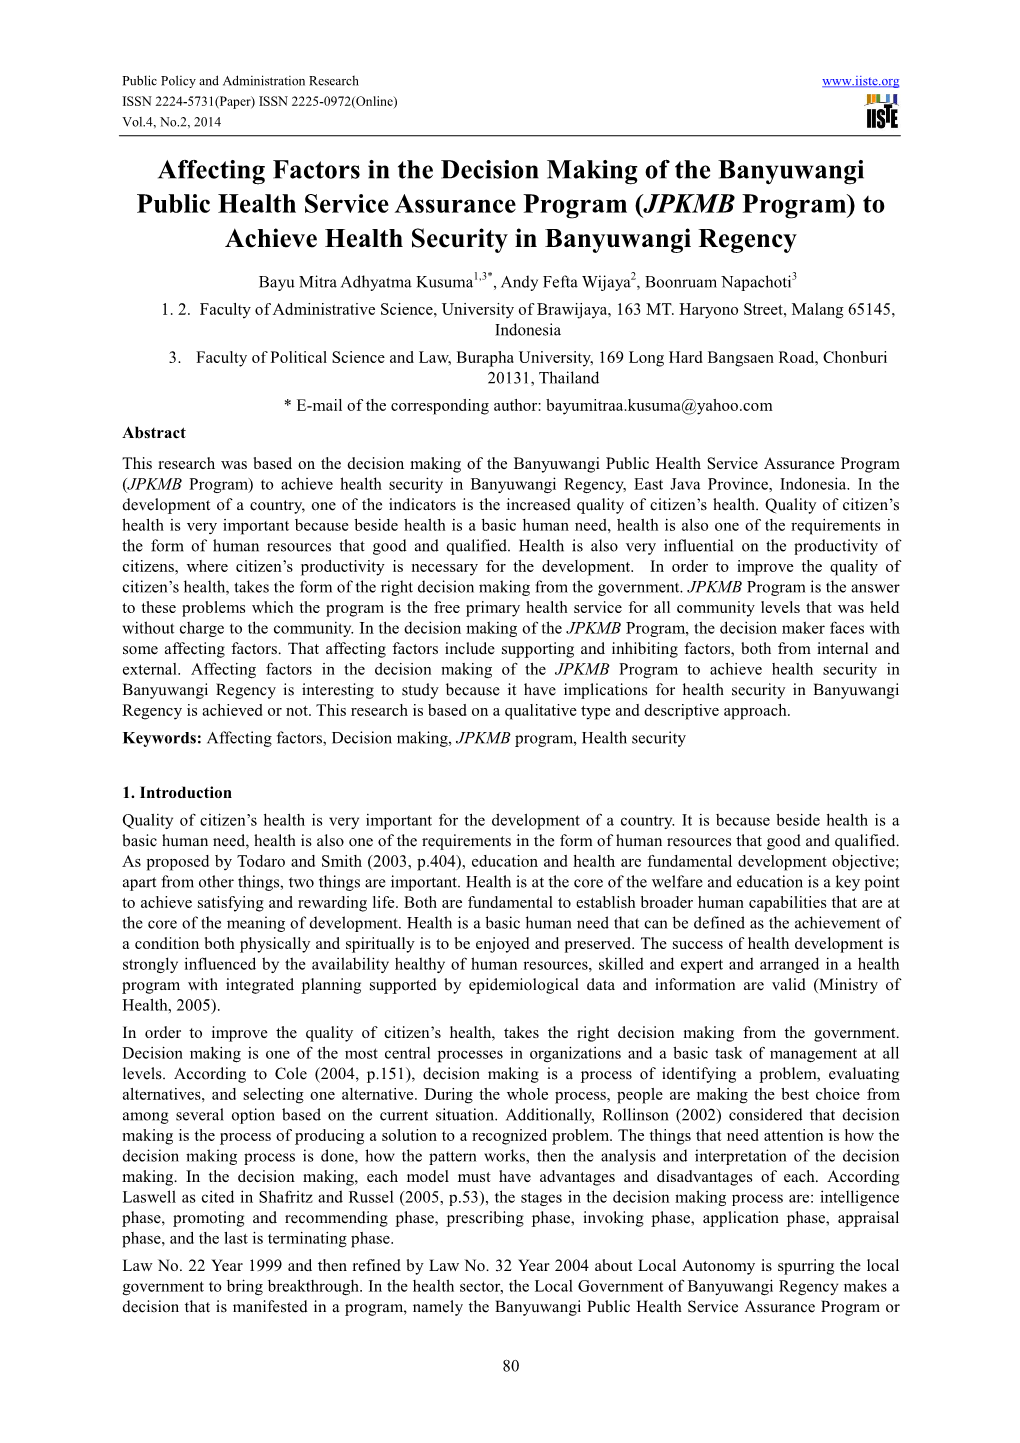 Affecting Factors in the Decision Making of the Banyuwangi Public Health Service Assurance Program ( JPKMB Program) to Achieve Health Security in Banyuwangi Regency